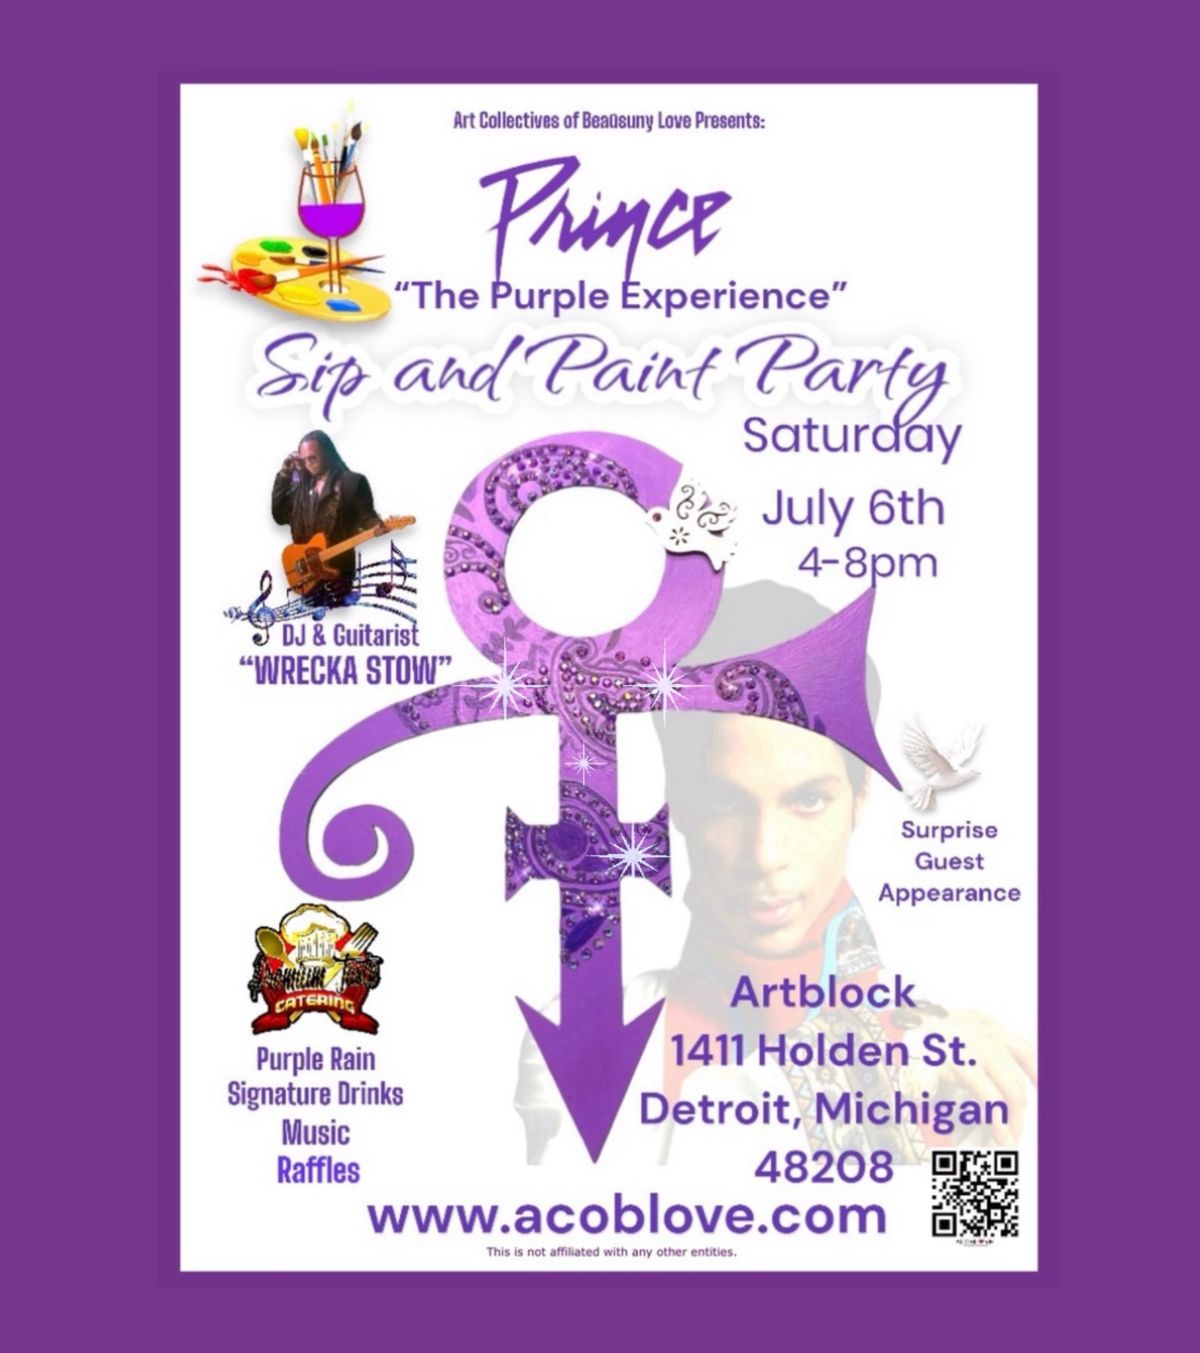 \u201cPrince The Purple Experience\u201d Sip and Paint Party